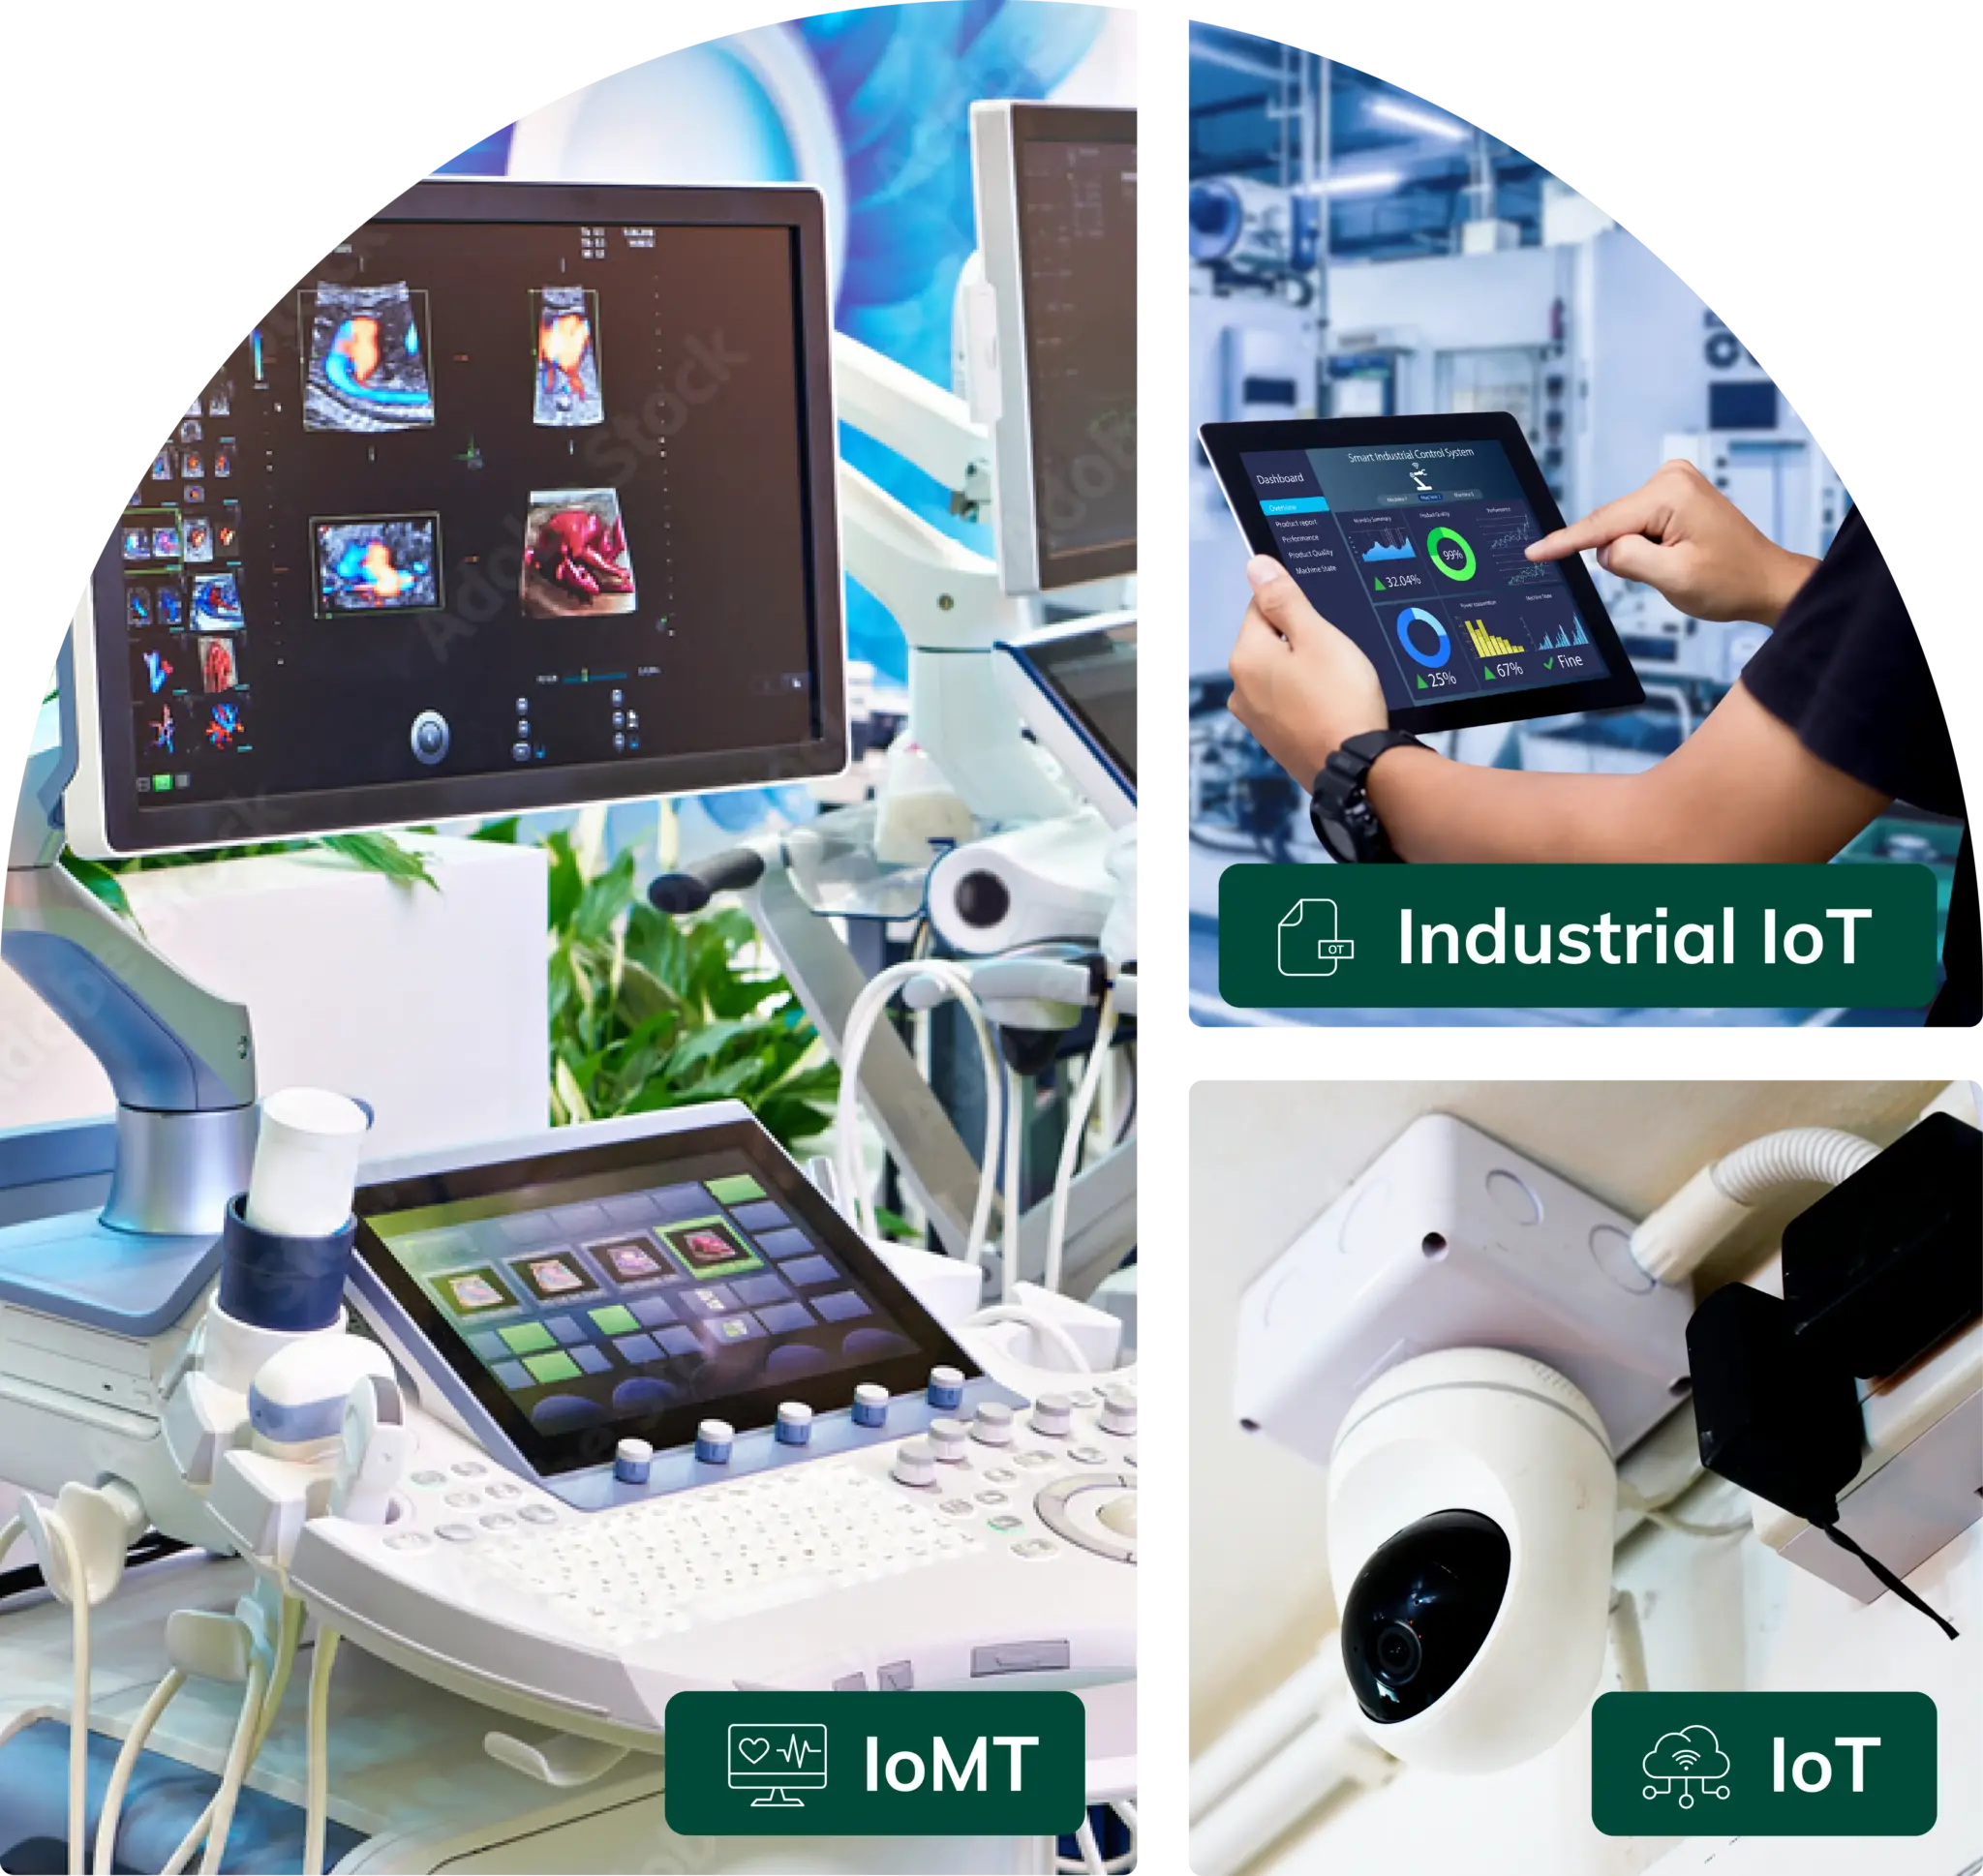 Three images - an IoMT ultra sound device, a tablet in an Industrial IoT shop, and a security camera